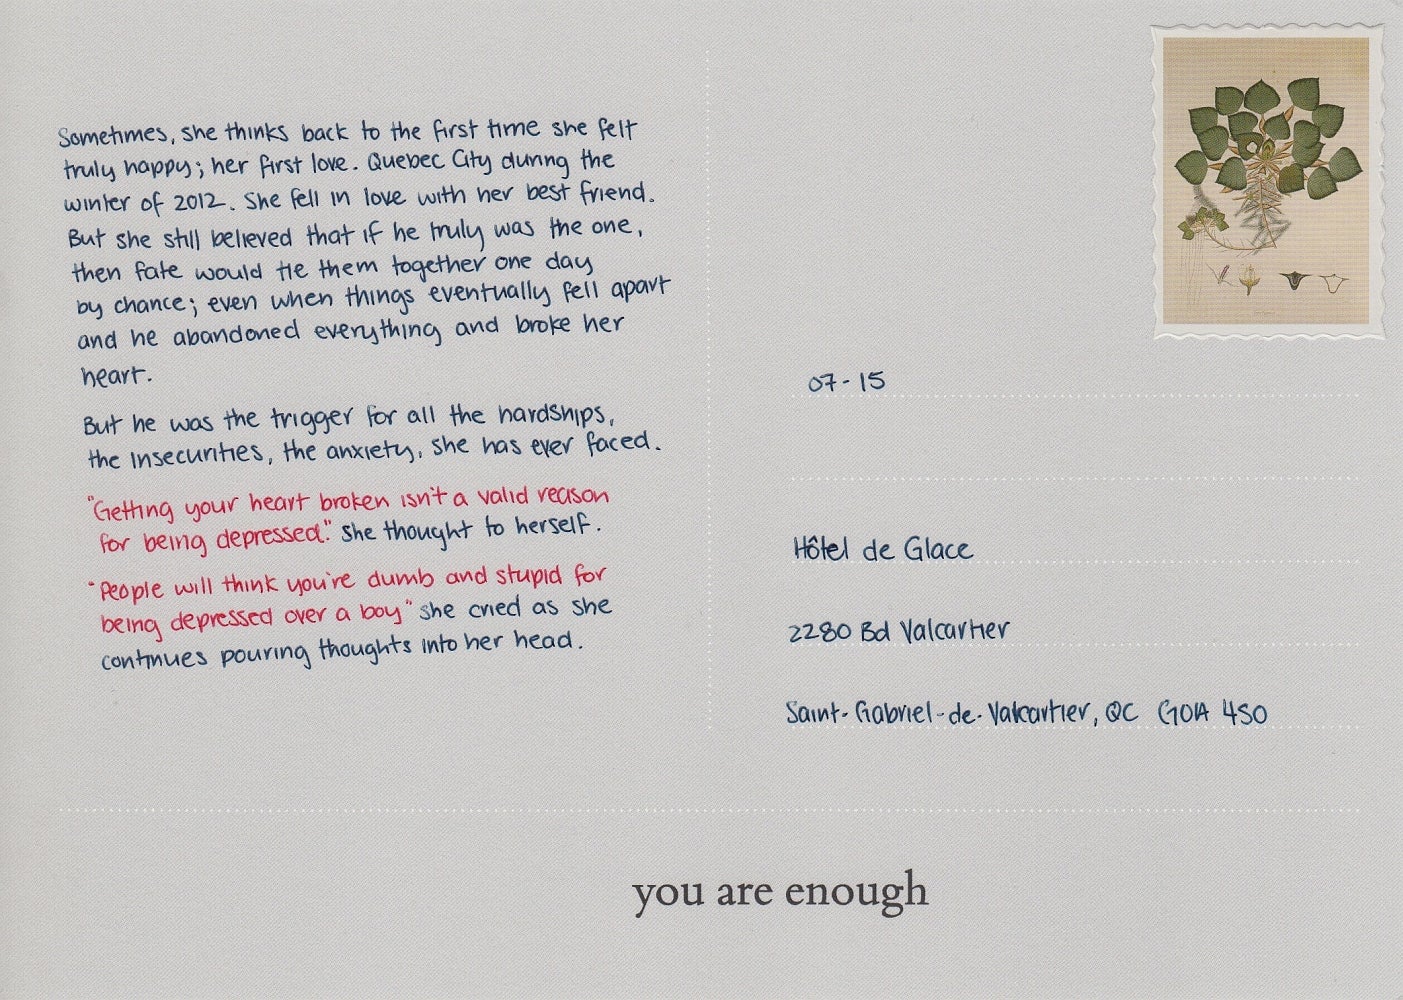 Artwork of the note on the back of a postcard, which reads like a diary entry or memory.